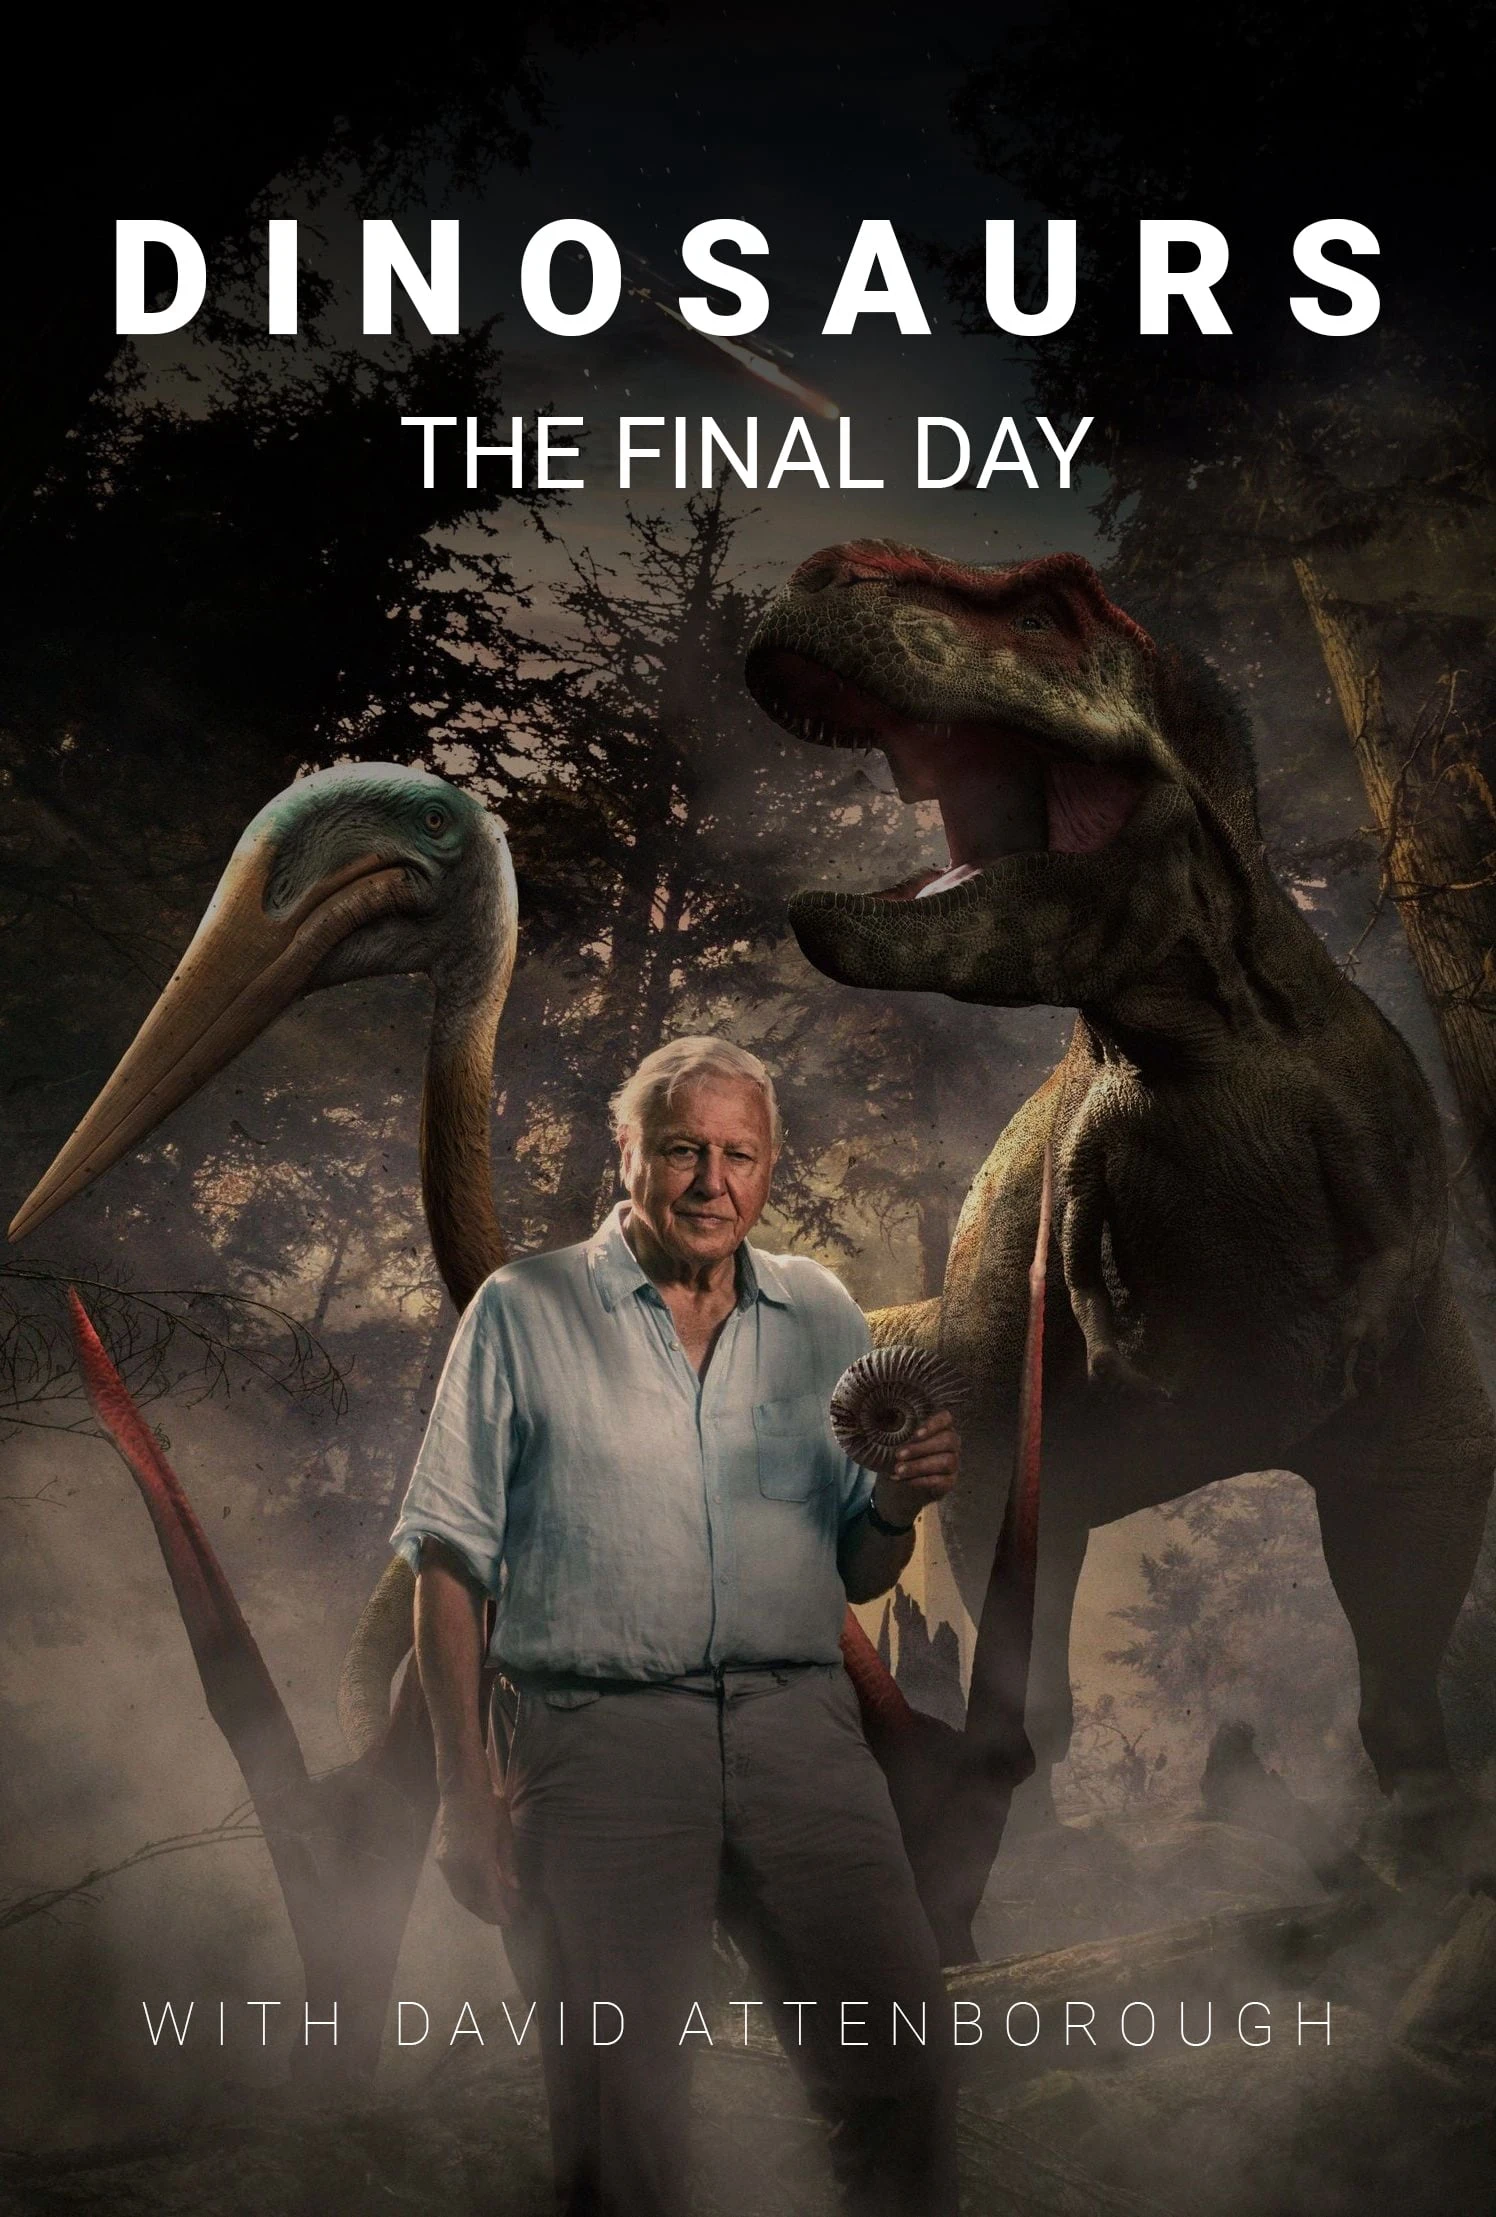 Dinosaurs: The Final Day with David Attenborough | Dinosaurs: The Final Day with David Attenborough (2022)